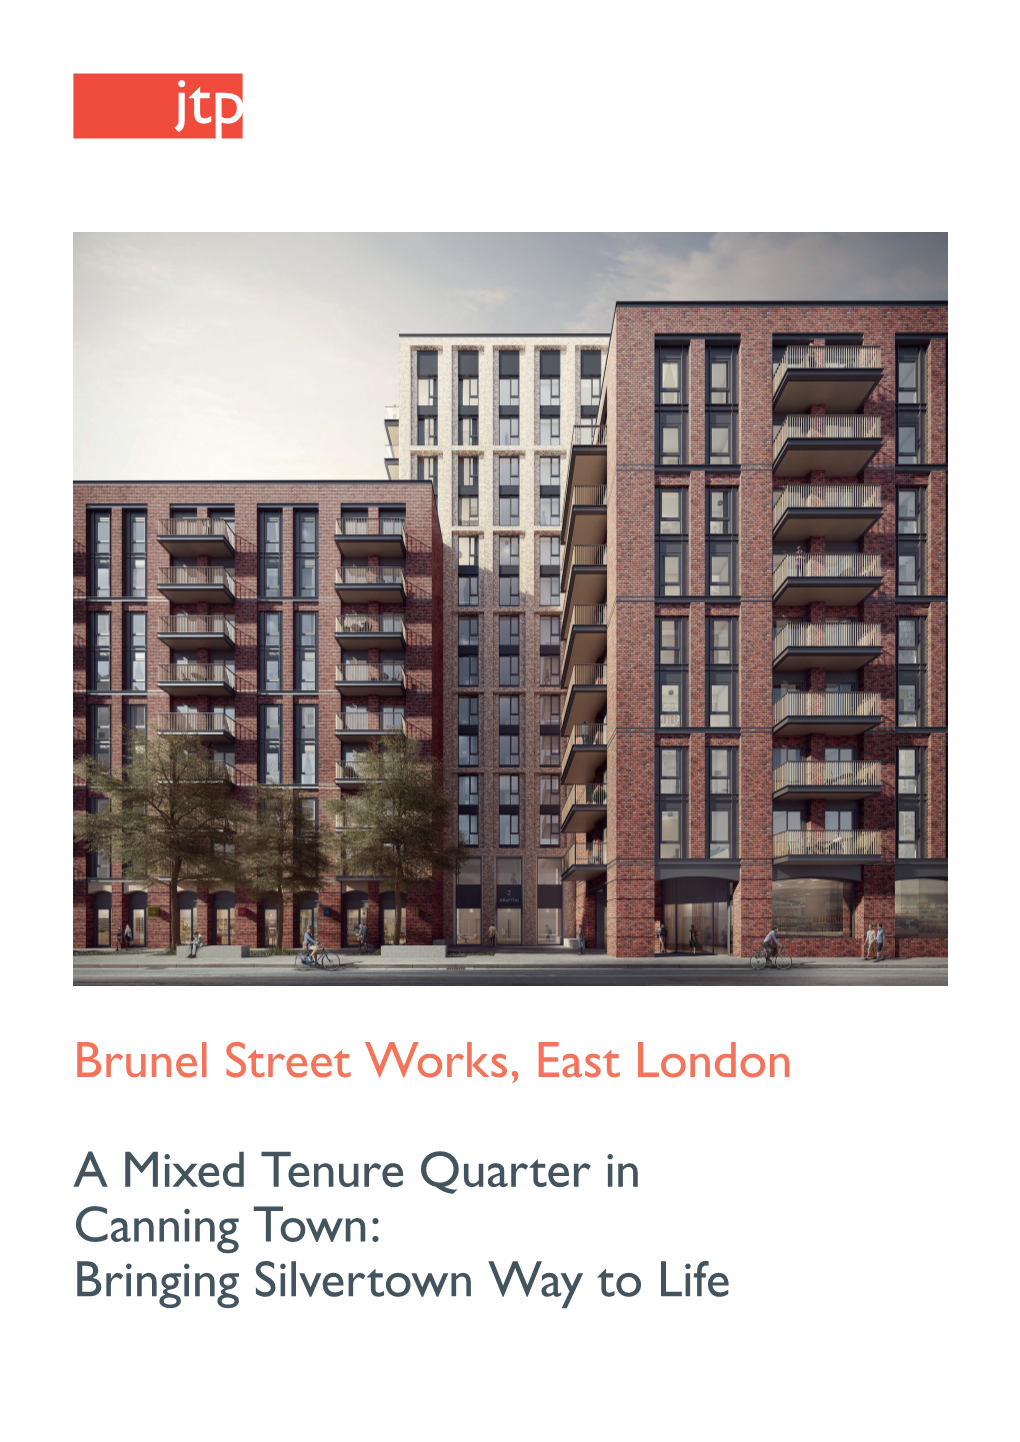 Brunel Street Works, East London a Mixed Tenure Quarter in Canning